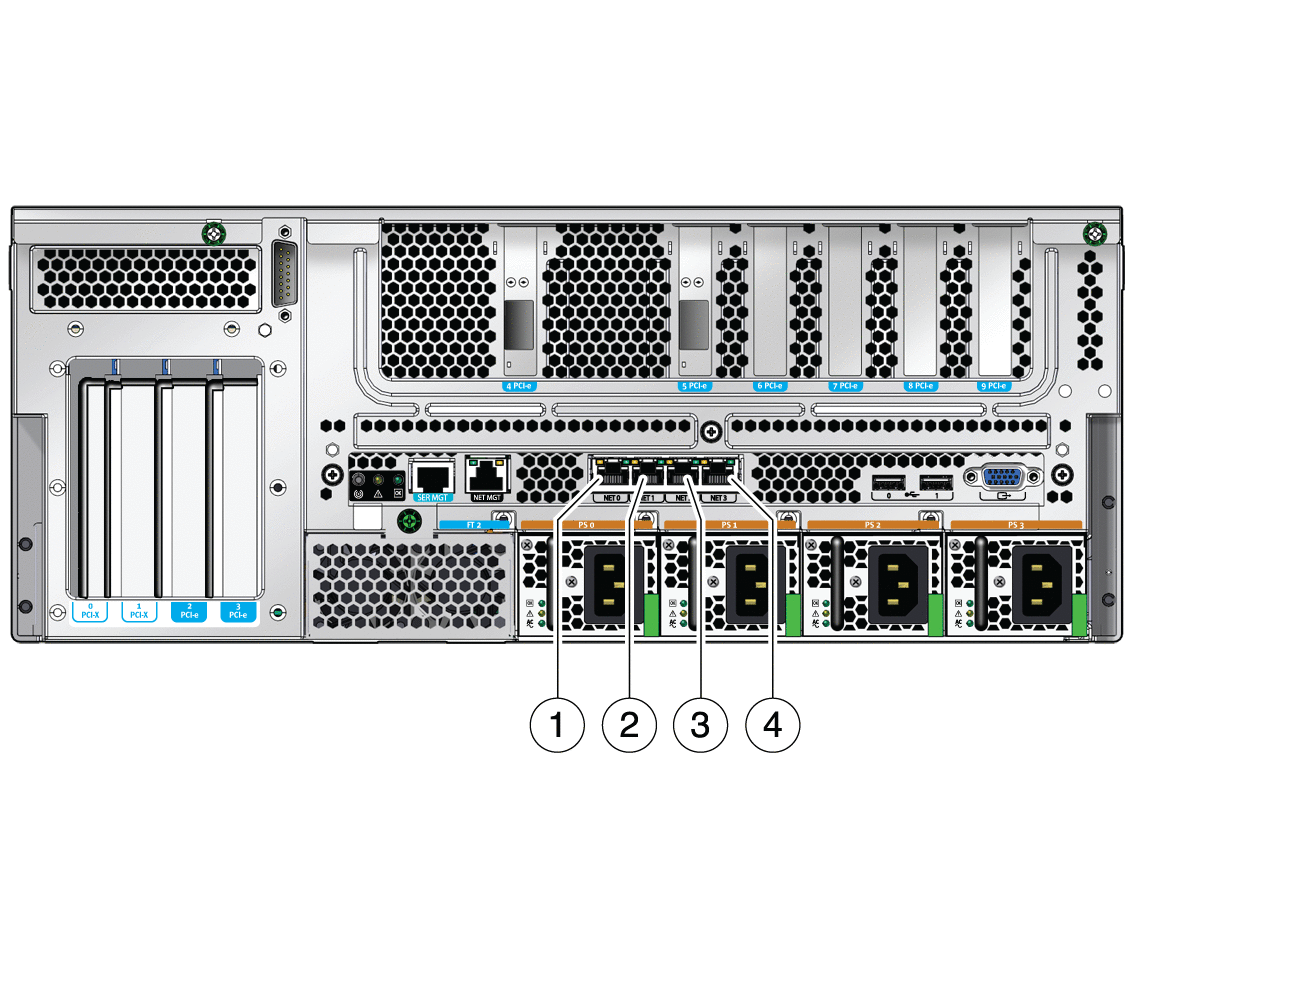 Figure showing the Ethernet network ports.